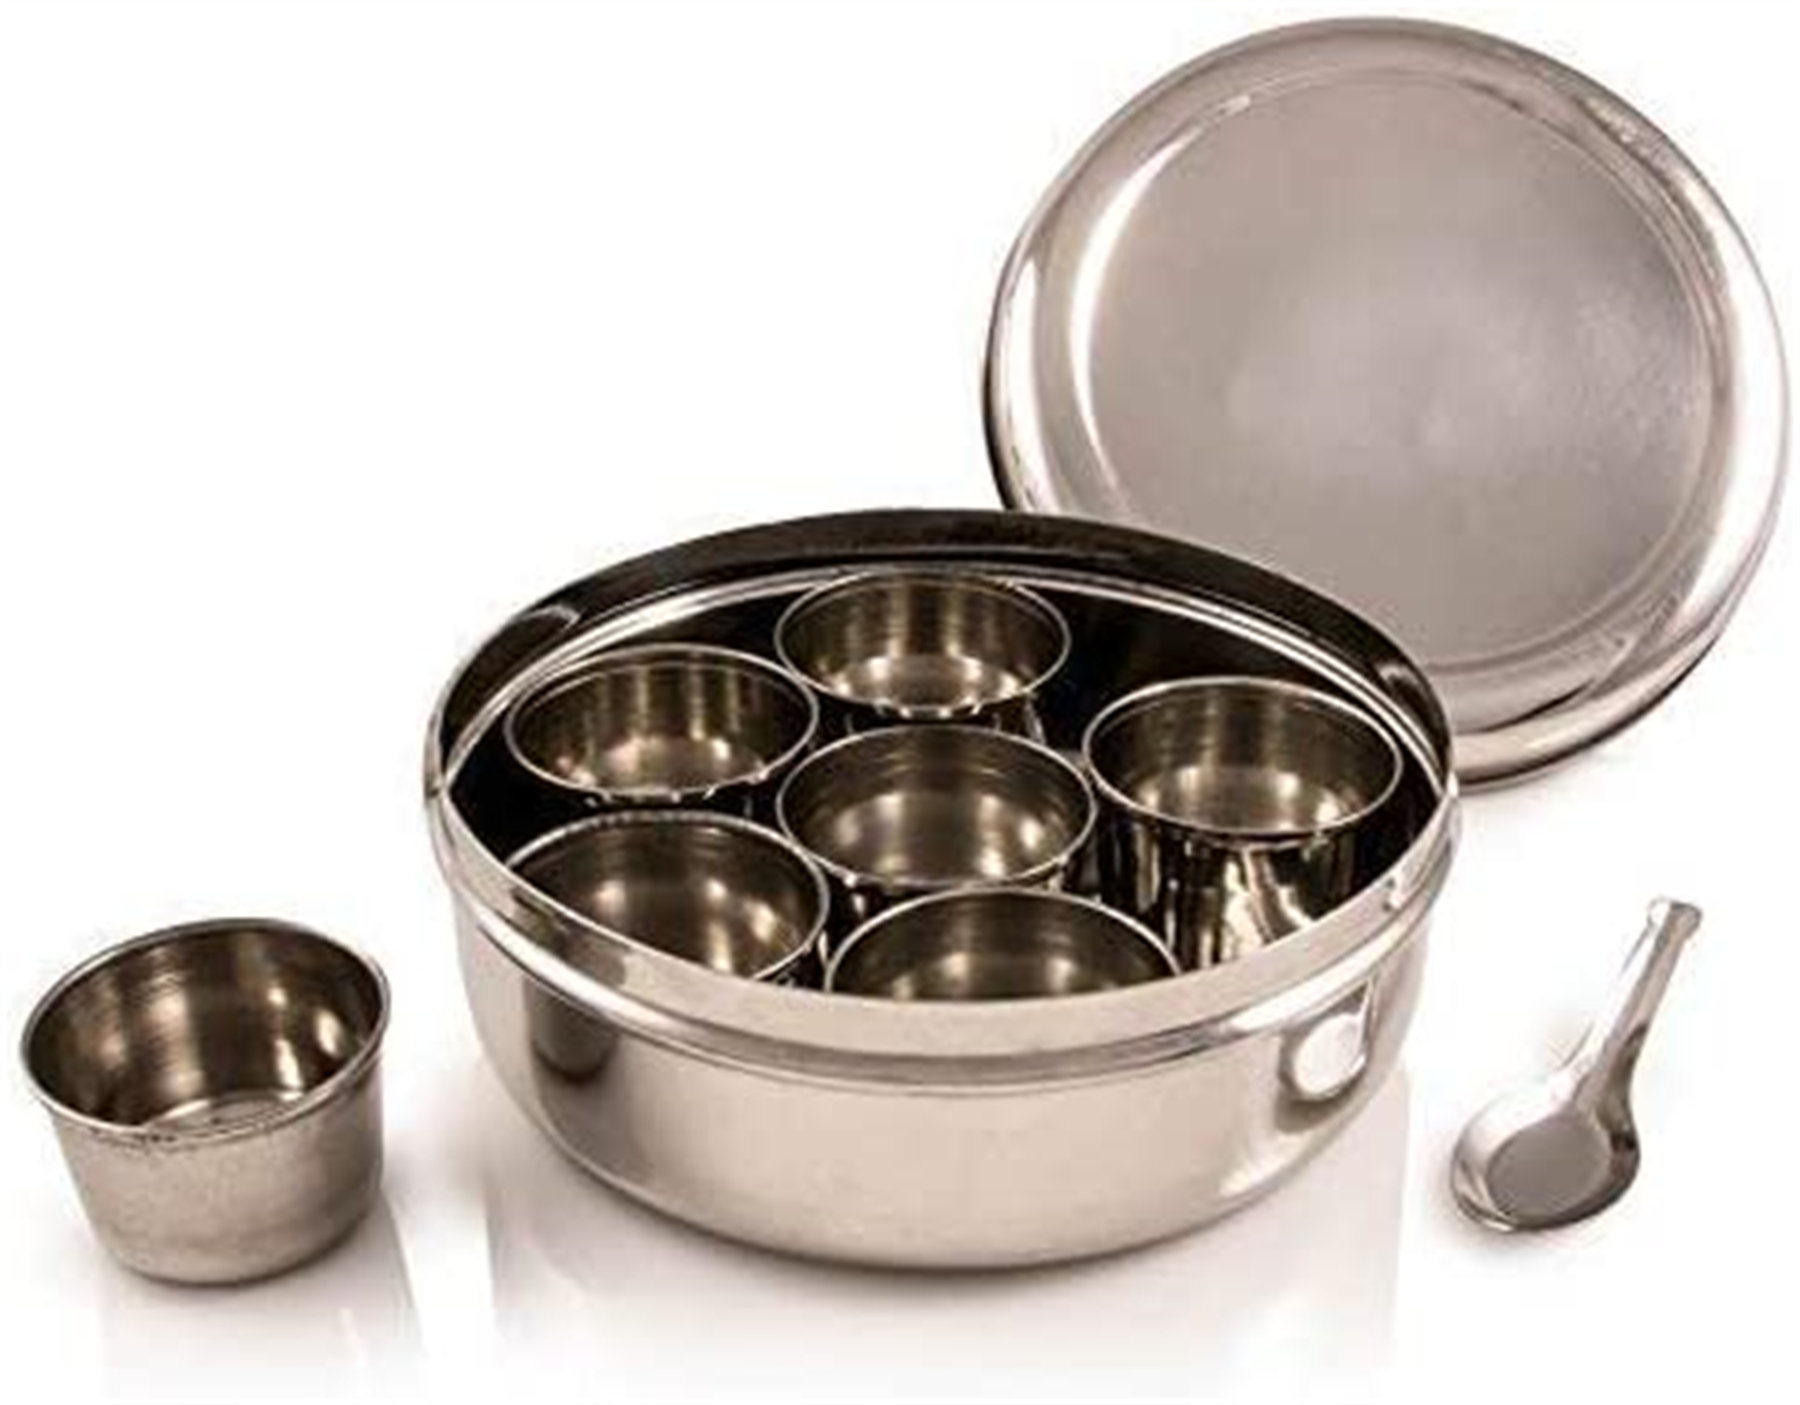 Masala dabba traditional spice box stainless steel with compartments and lid 